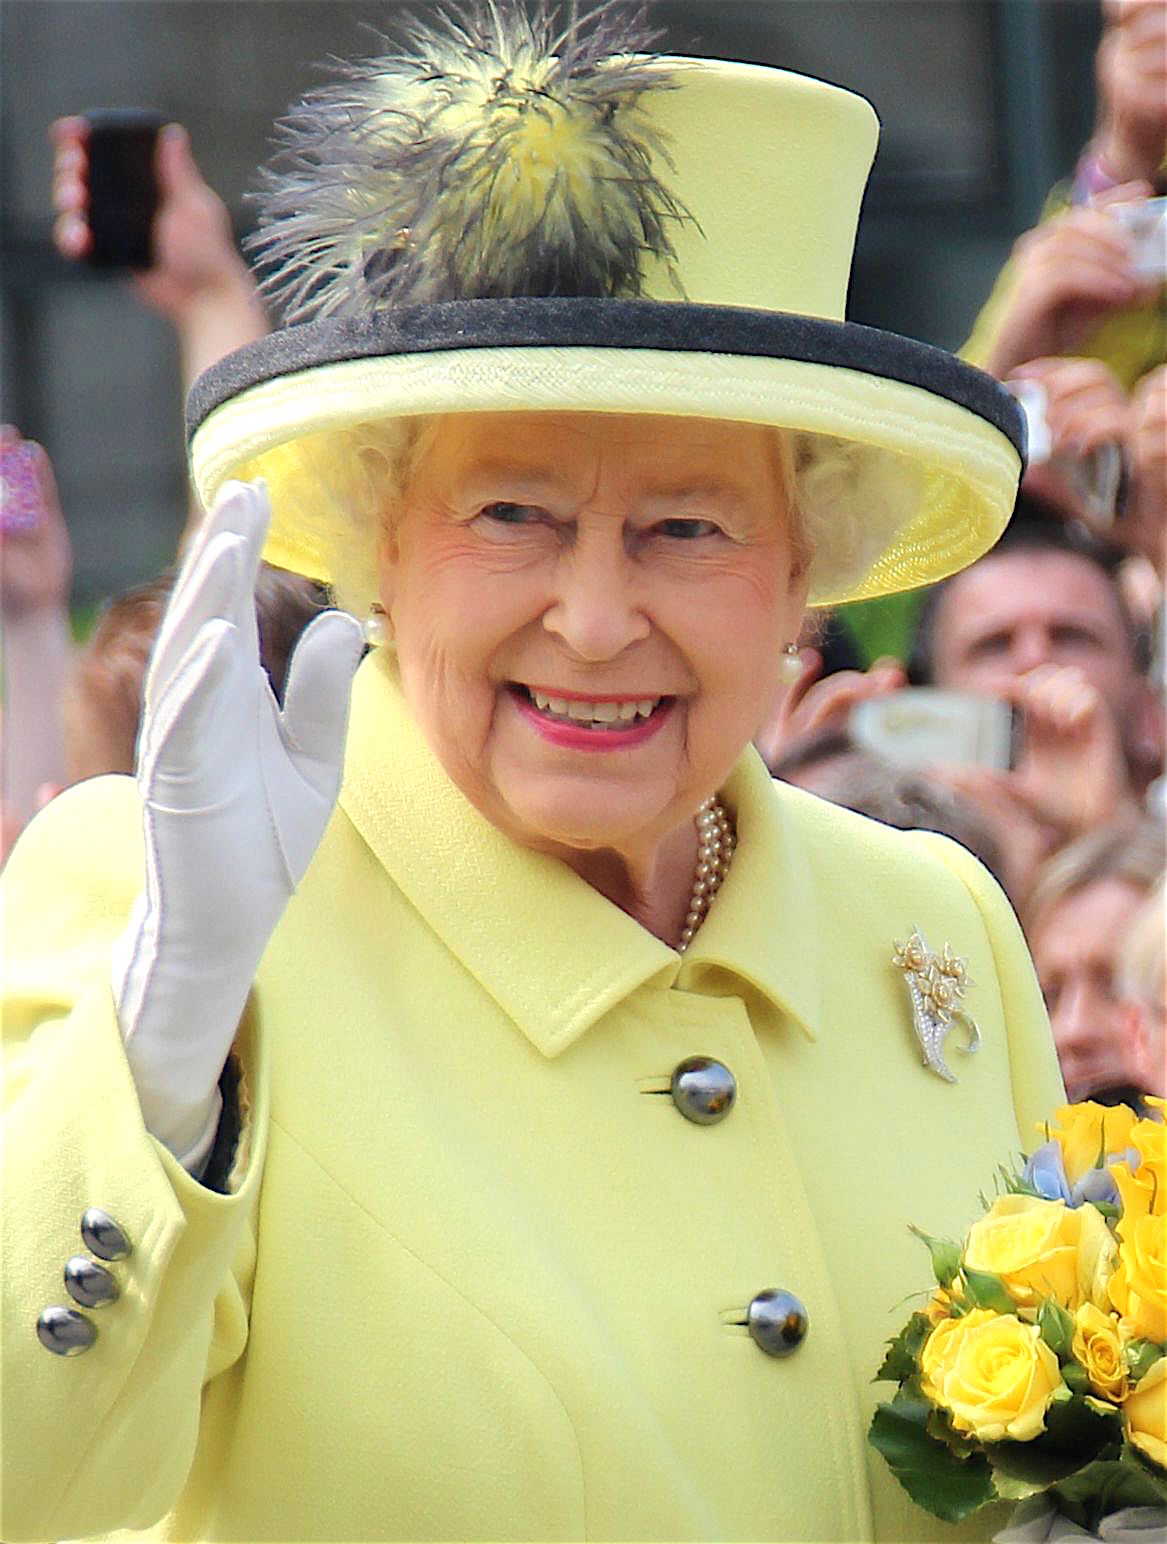 Elizabeth II in 2015 © PolizeiBerlin - licence [CC BY-SA 4.0] from Wikimedia Commons